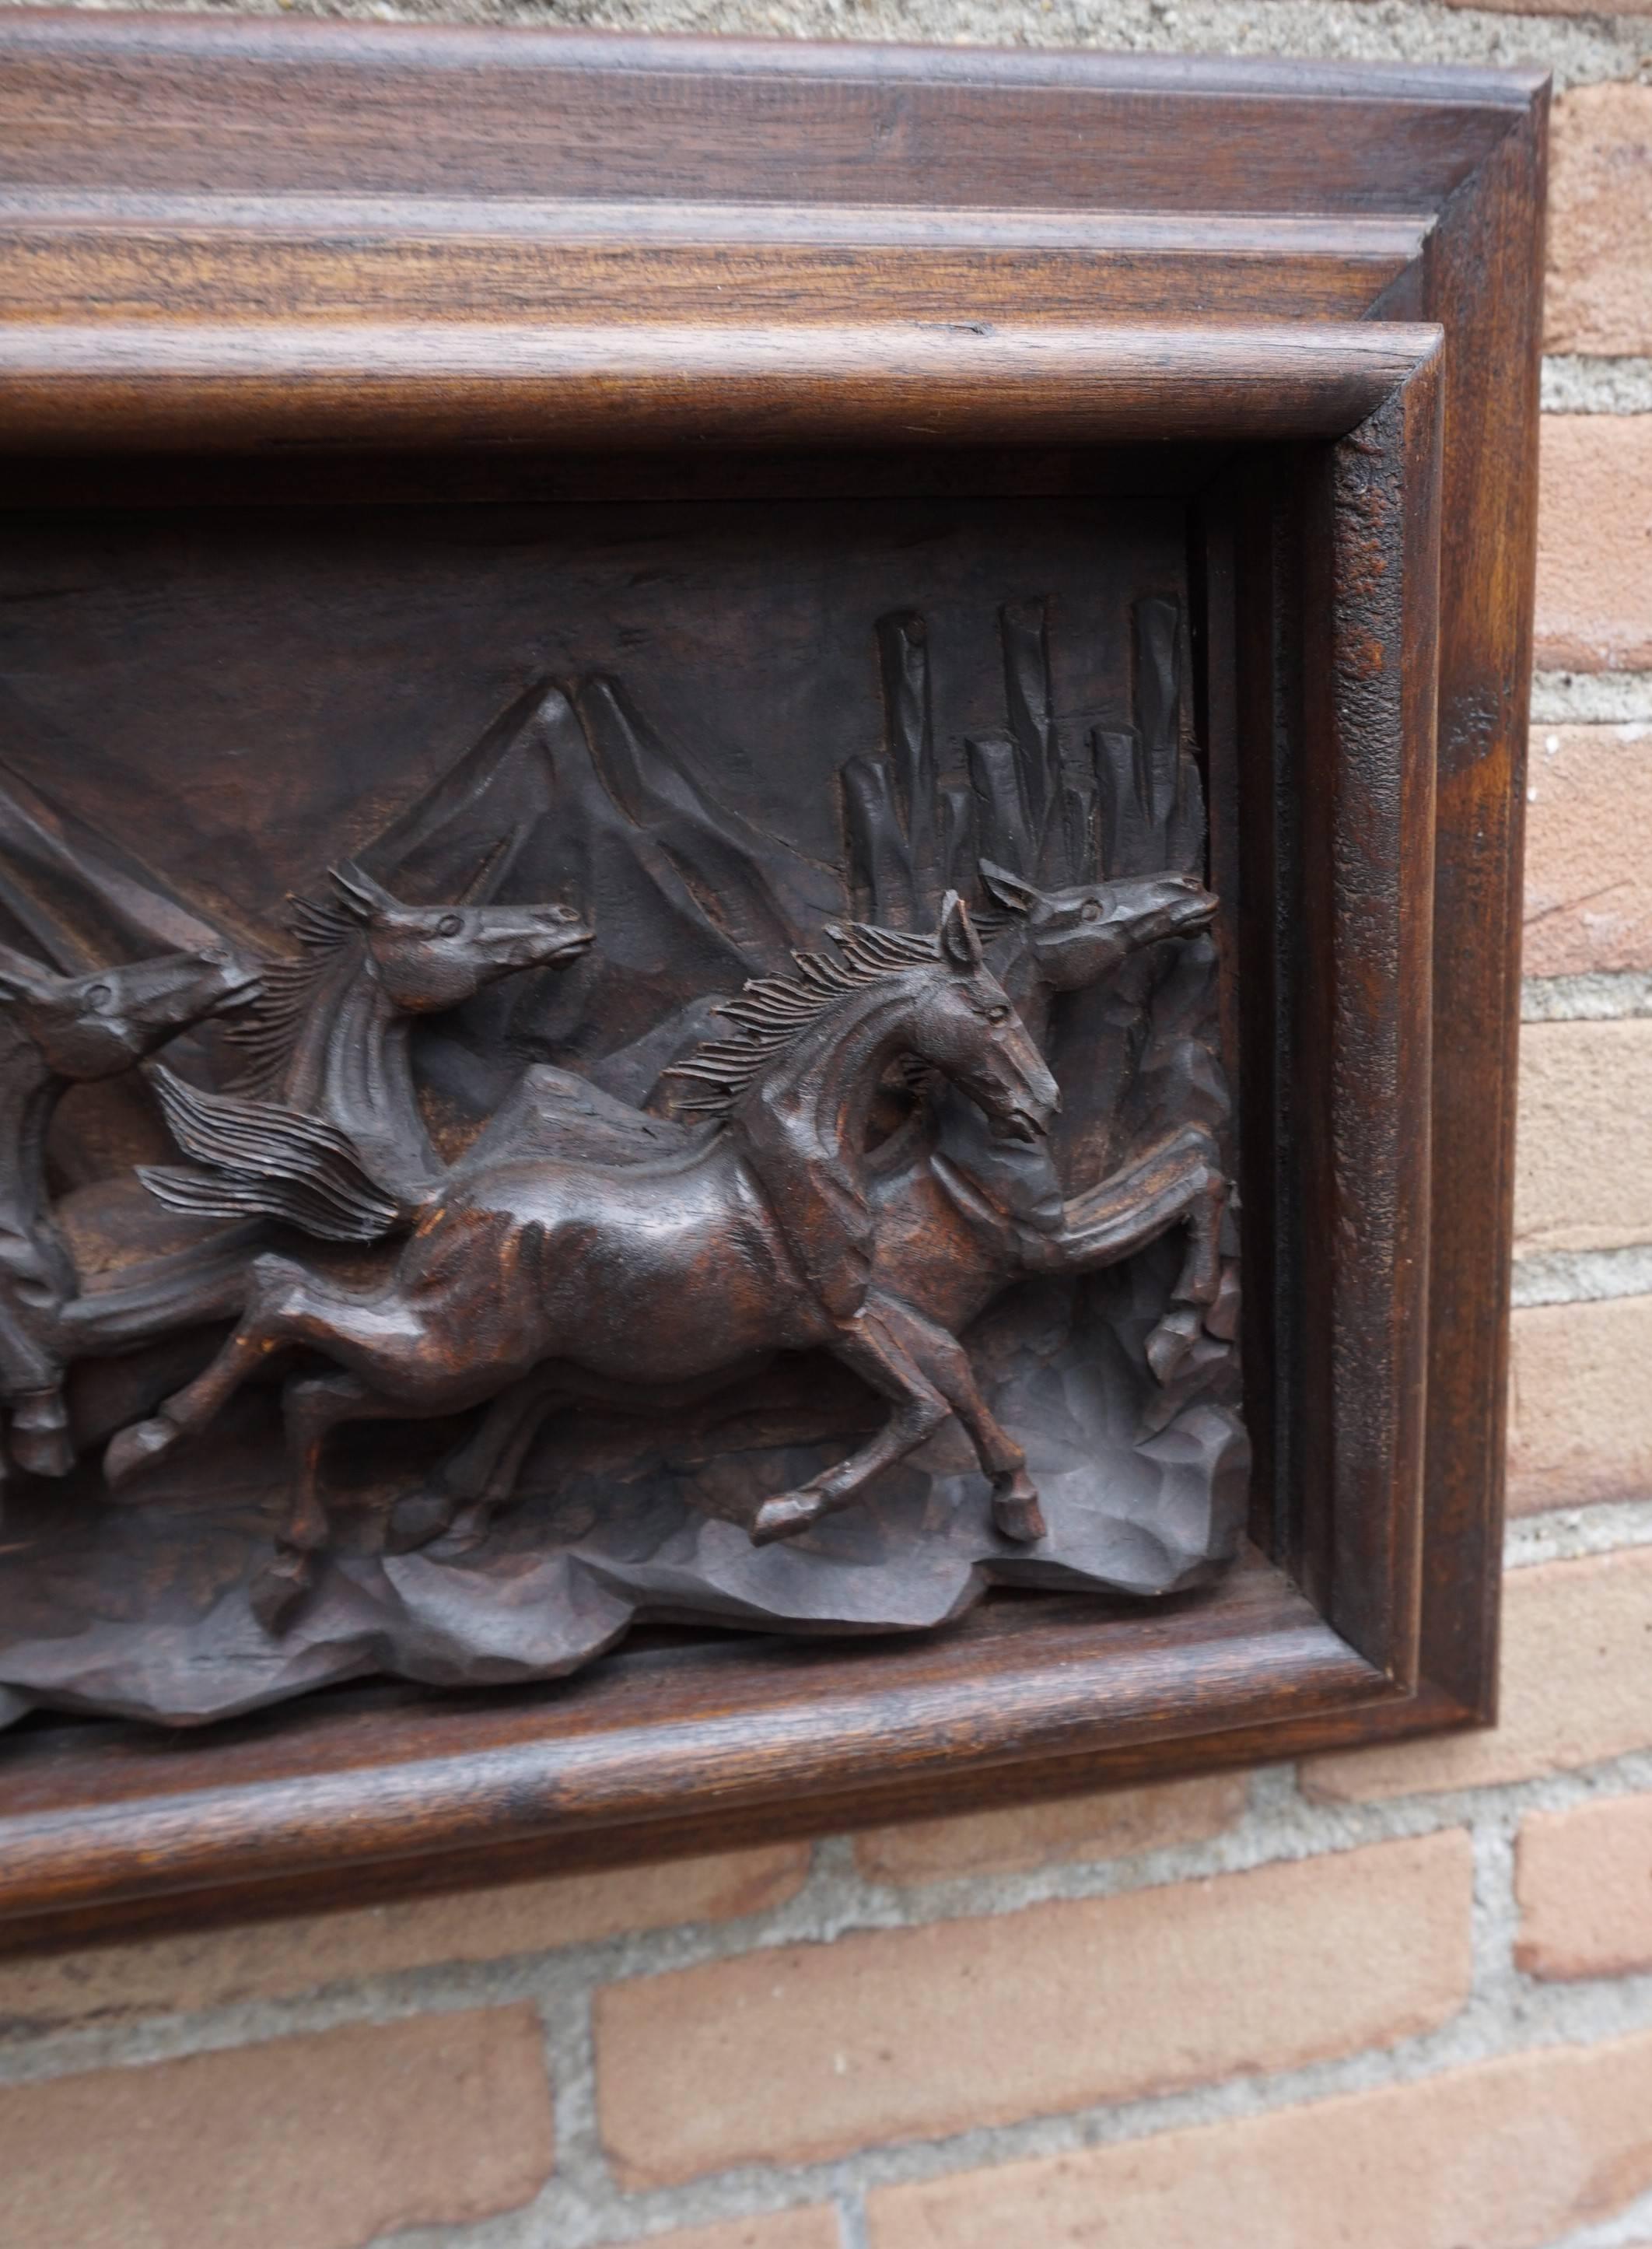 Teak Hand-Carved Wall Plaque with Eight Wild Horses / Horse Sculptures in Deep Relief